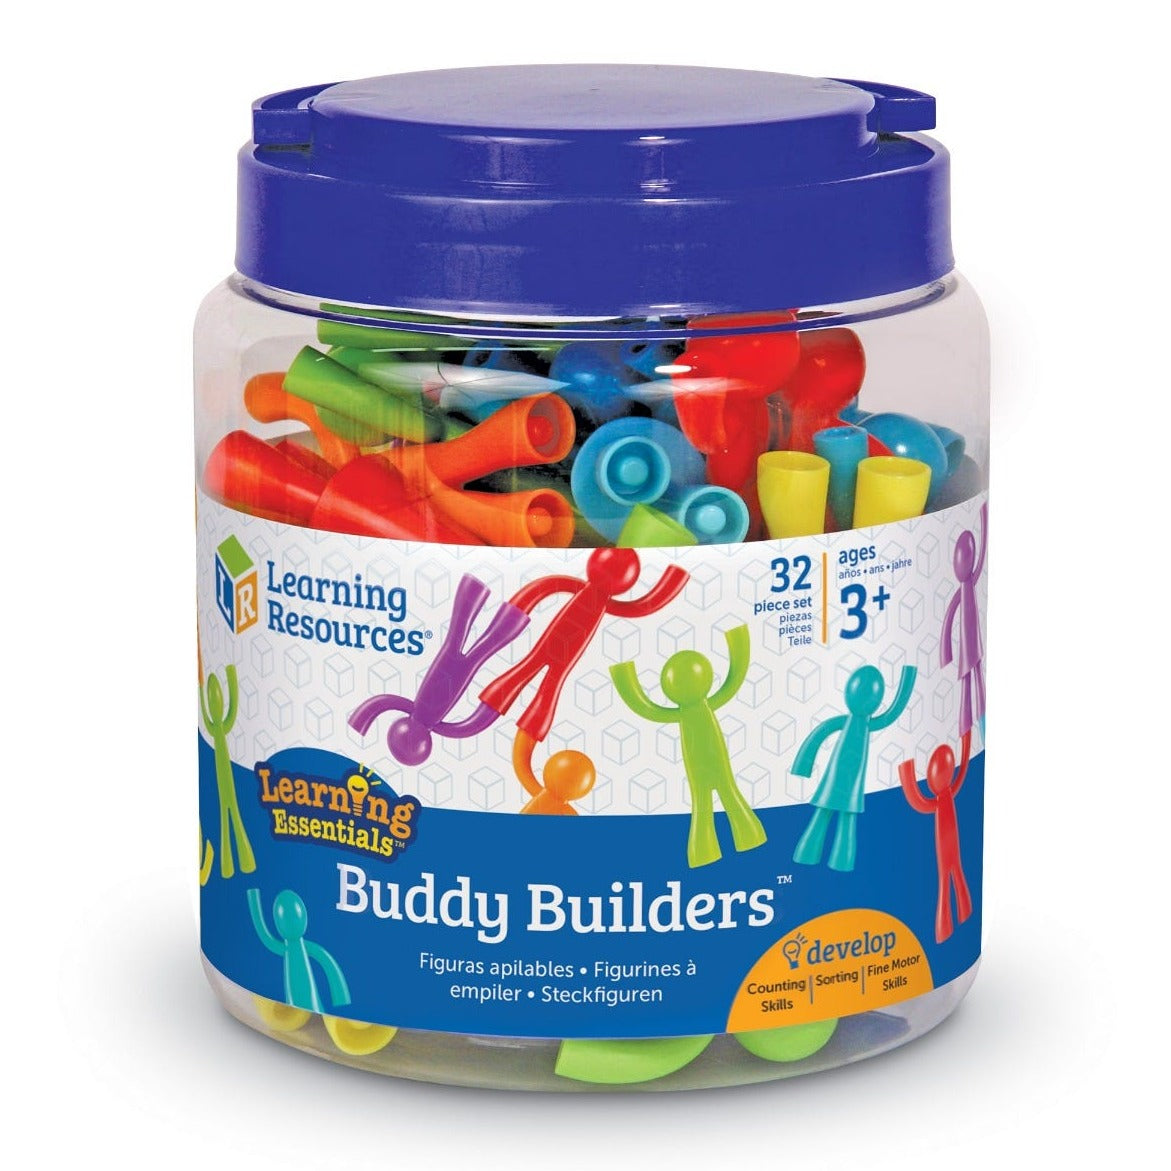 All About Me Buddy Builders, The All About Me Buddy Builders encourages kids to build their hand-eye coordination and strengthen motor skills while they have hours of fun with these engaging building figures. Arms connect to legs, so kids can construct for hours, all while learning about colours and developing fine motor skills. Young learners will enjoy stacking and building these colourful characters as they develop a variety of early learning skills. Activity set sparks imaginations as early learners bui